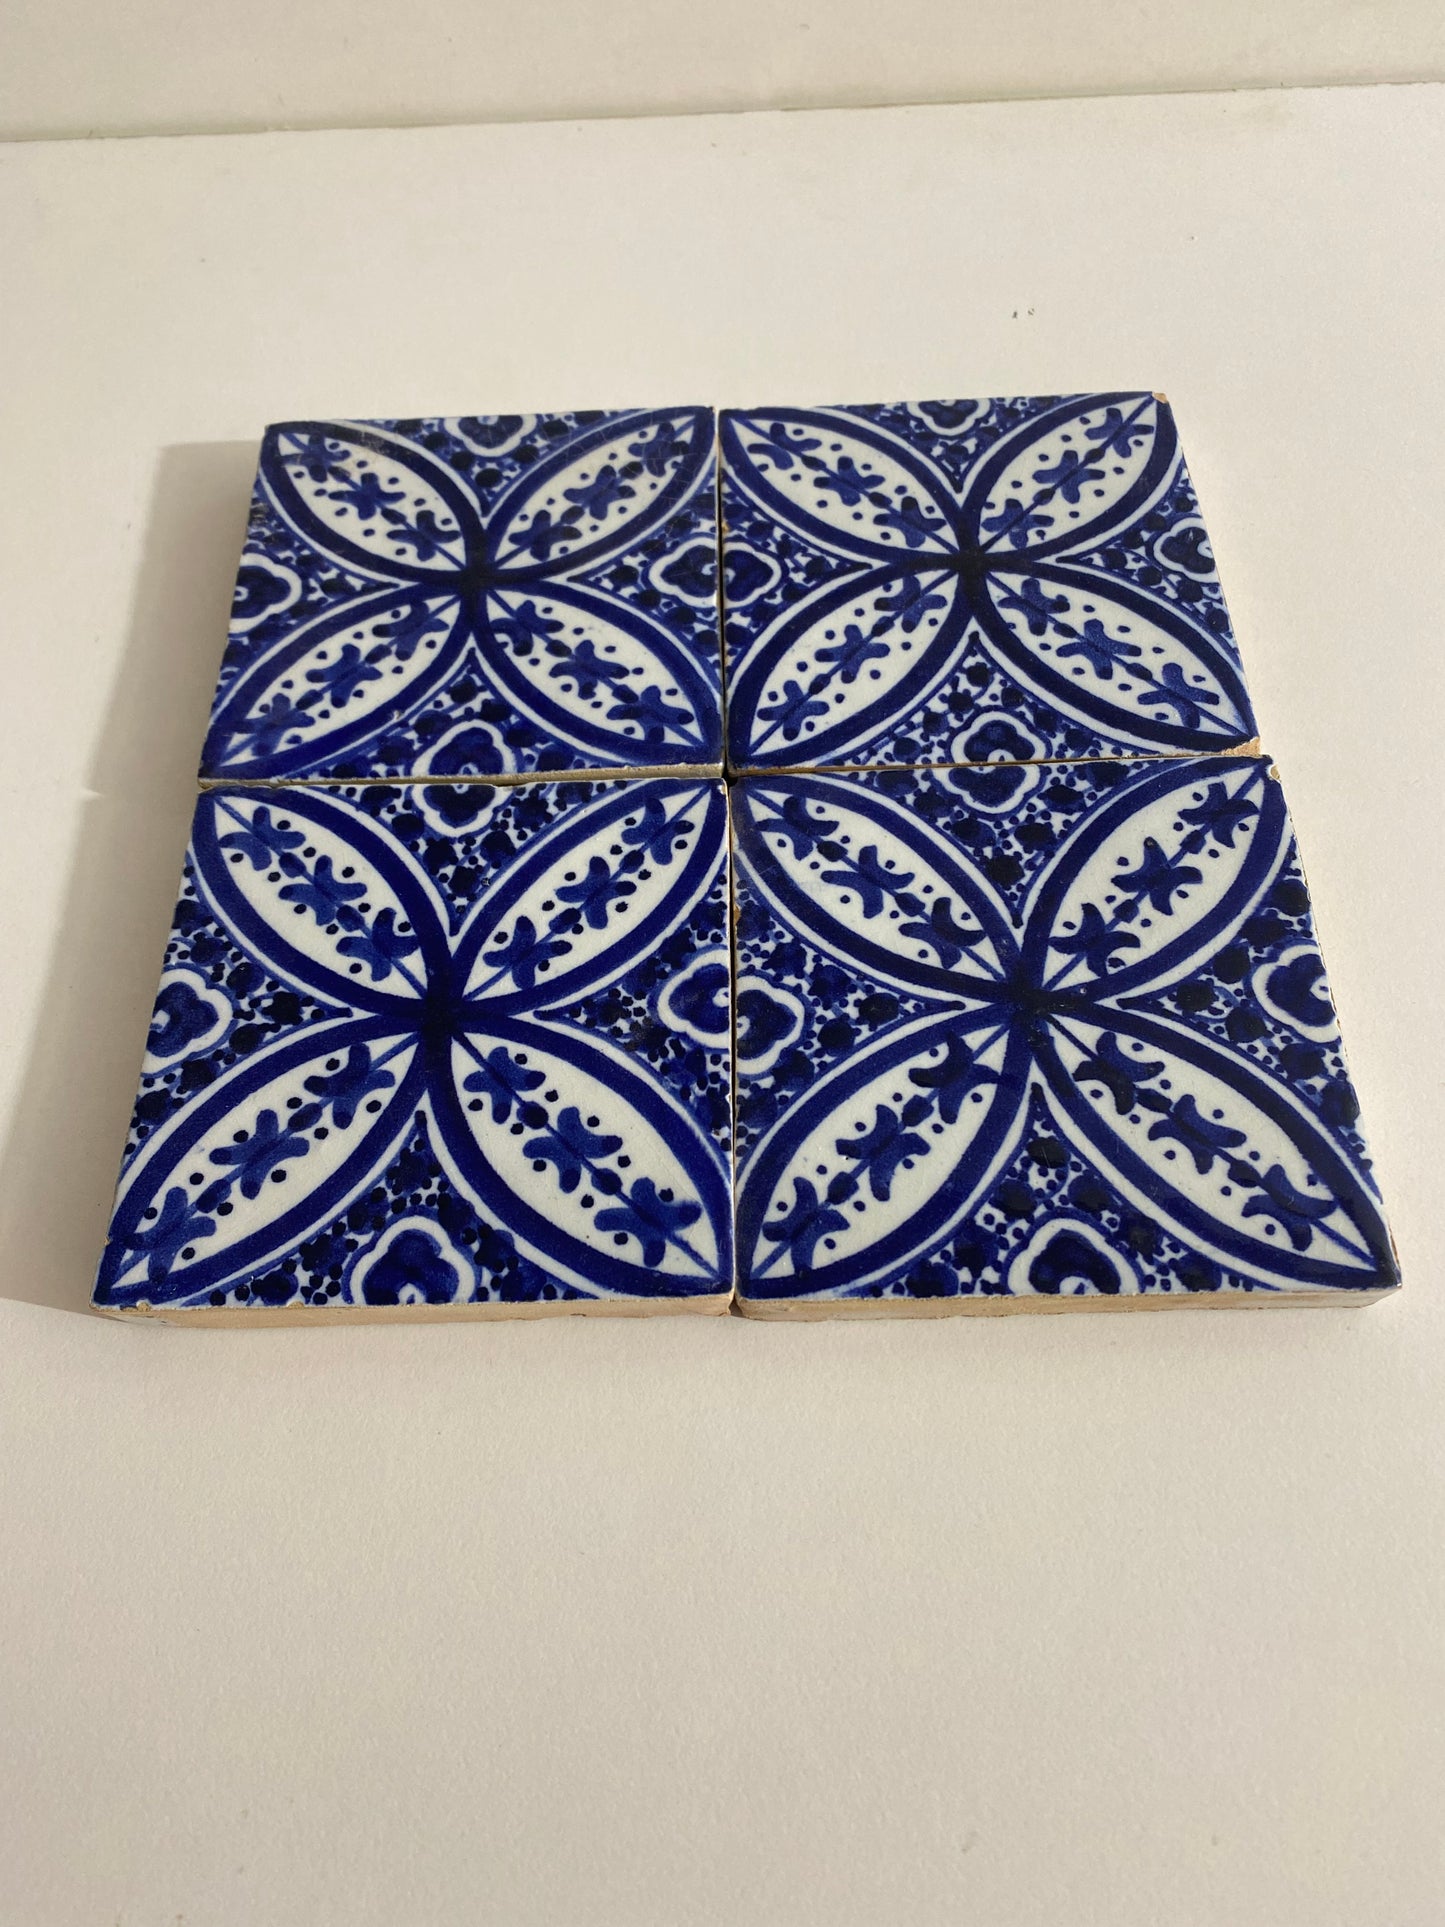 Moroccan Ceramic tiles Hand painted floral tiles 4"x4" 100% Handmade for Bathroom Remodeling and kitchen Projects works wall and ground